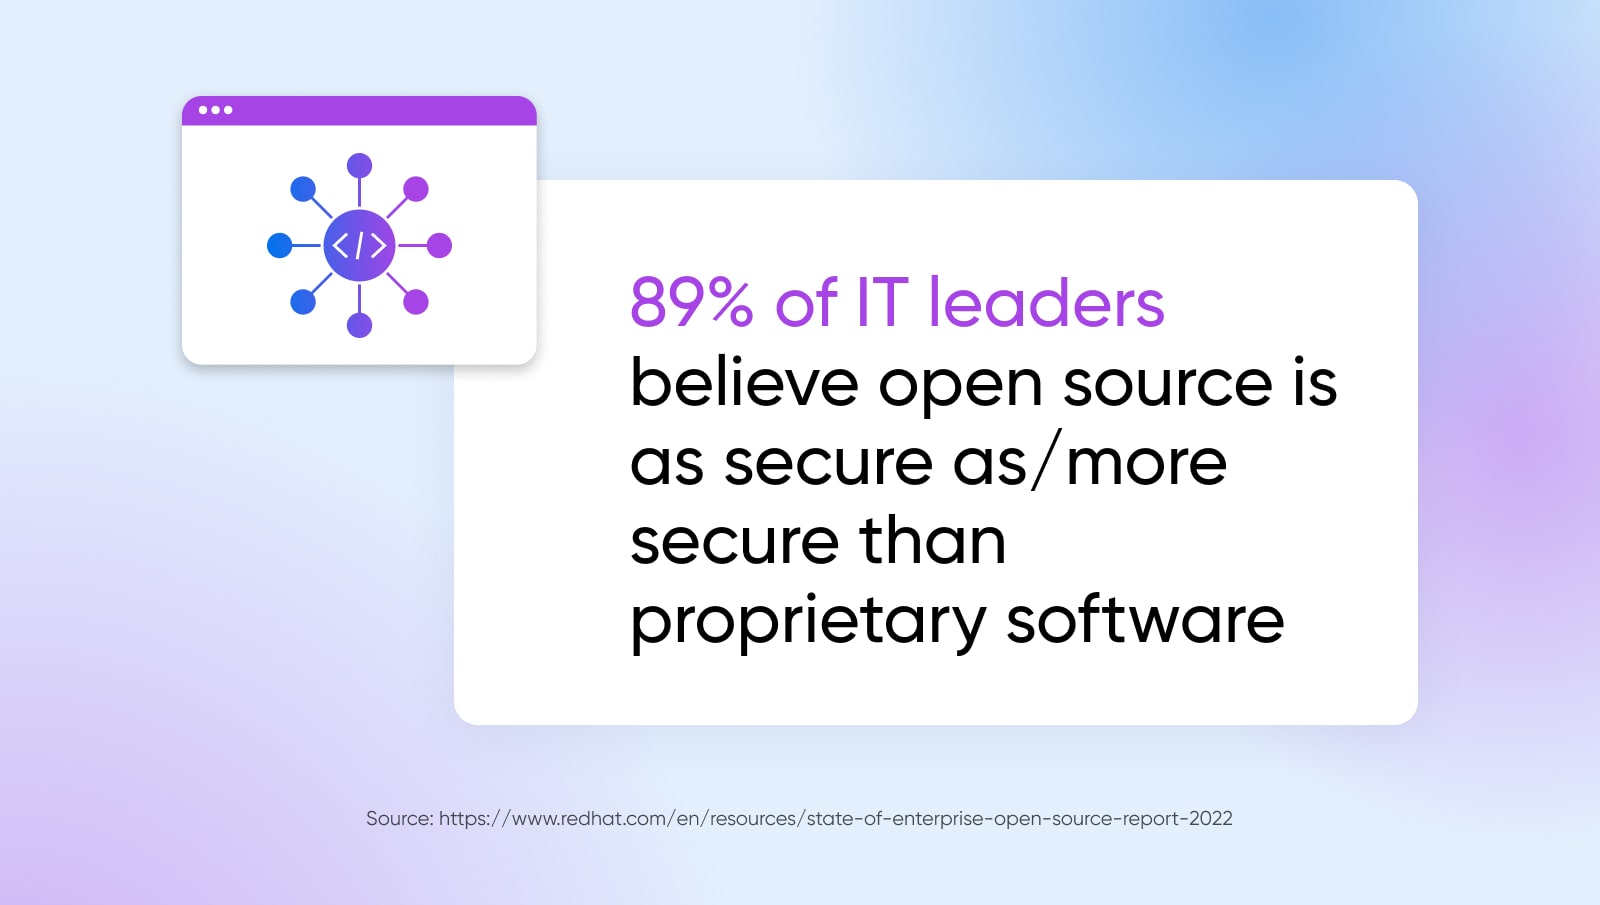 89% of IT leaders believe open source is as secure as or more secure than proprietary software according to redhat.com 